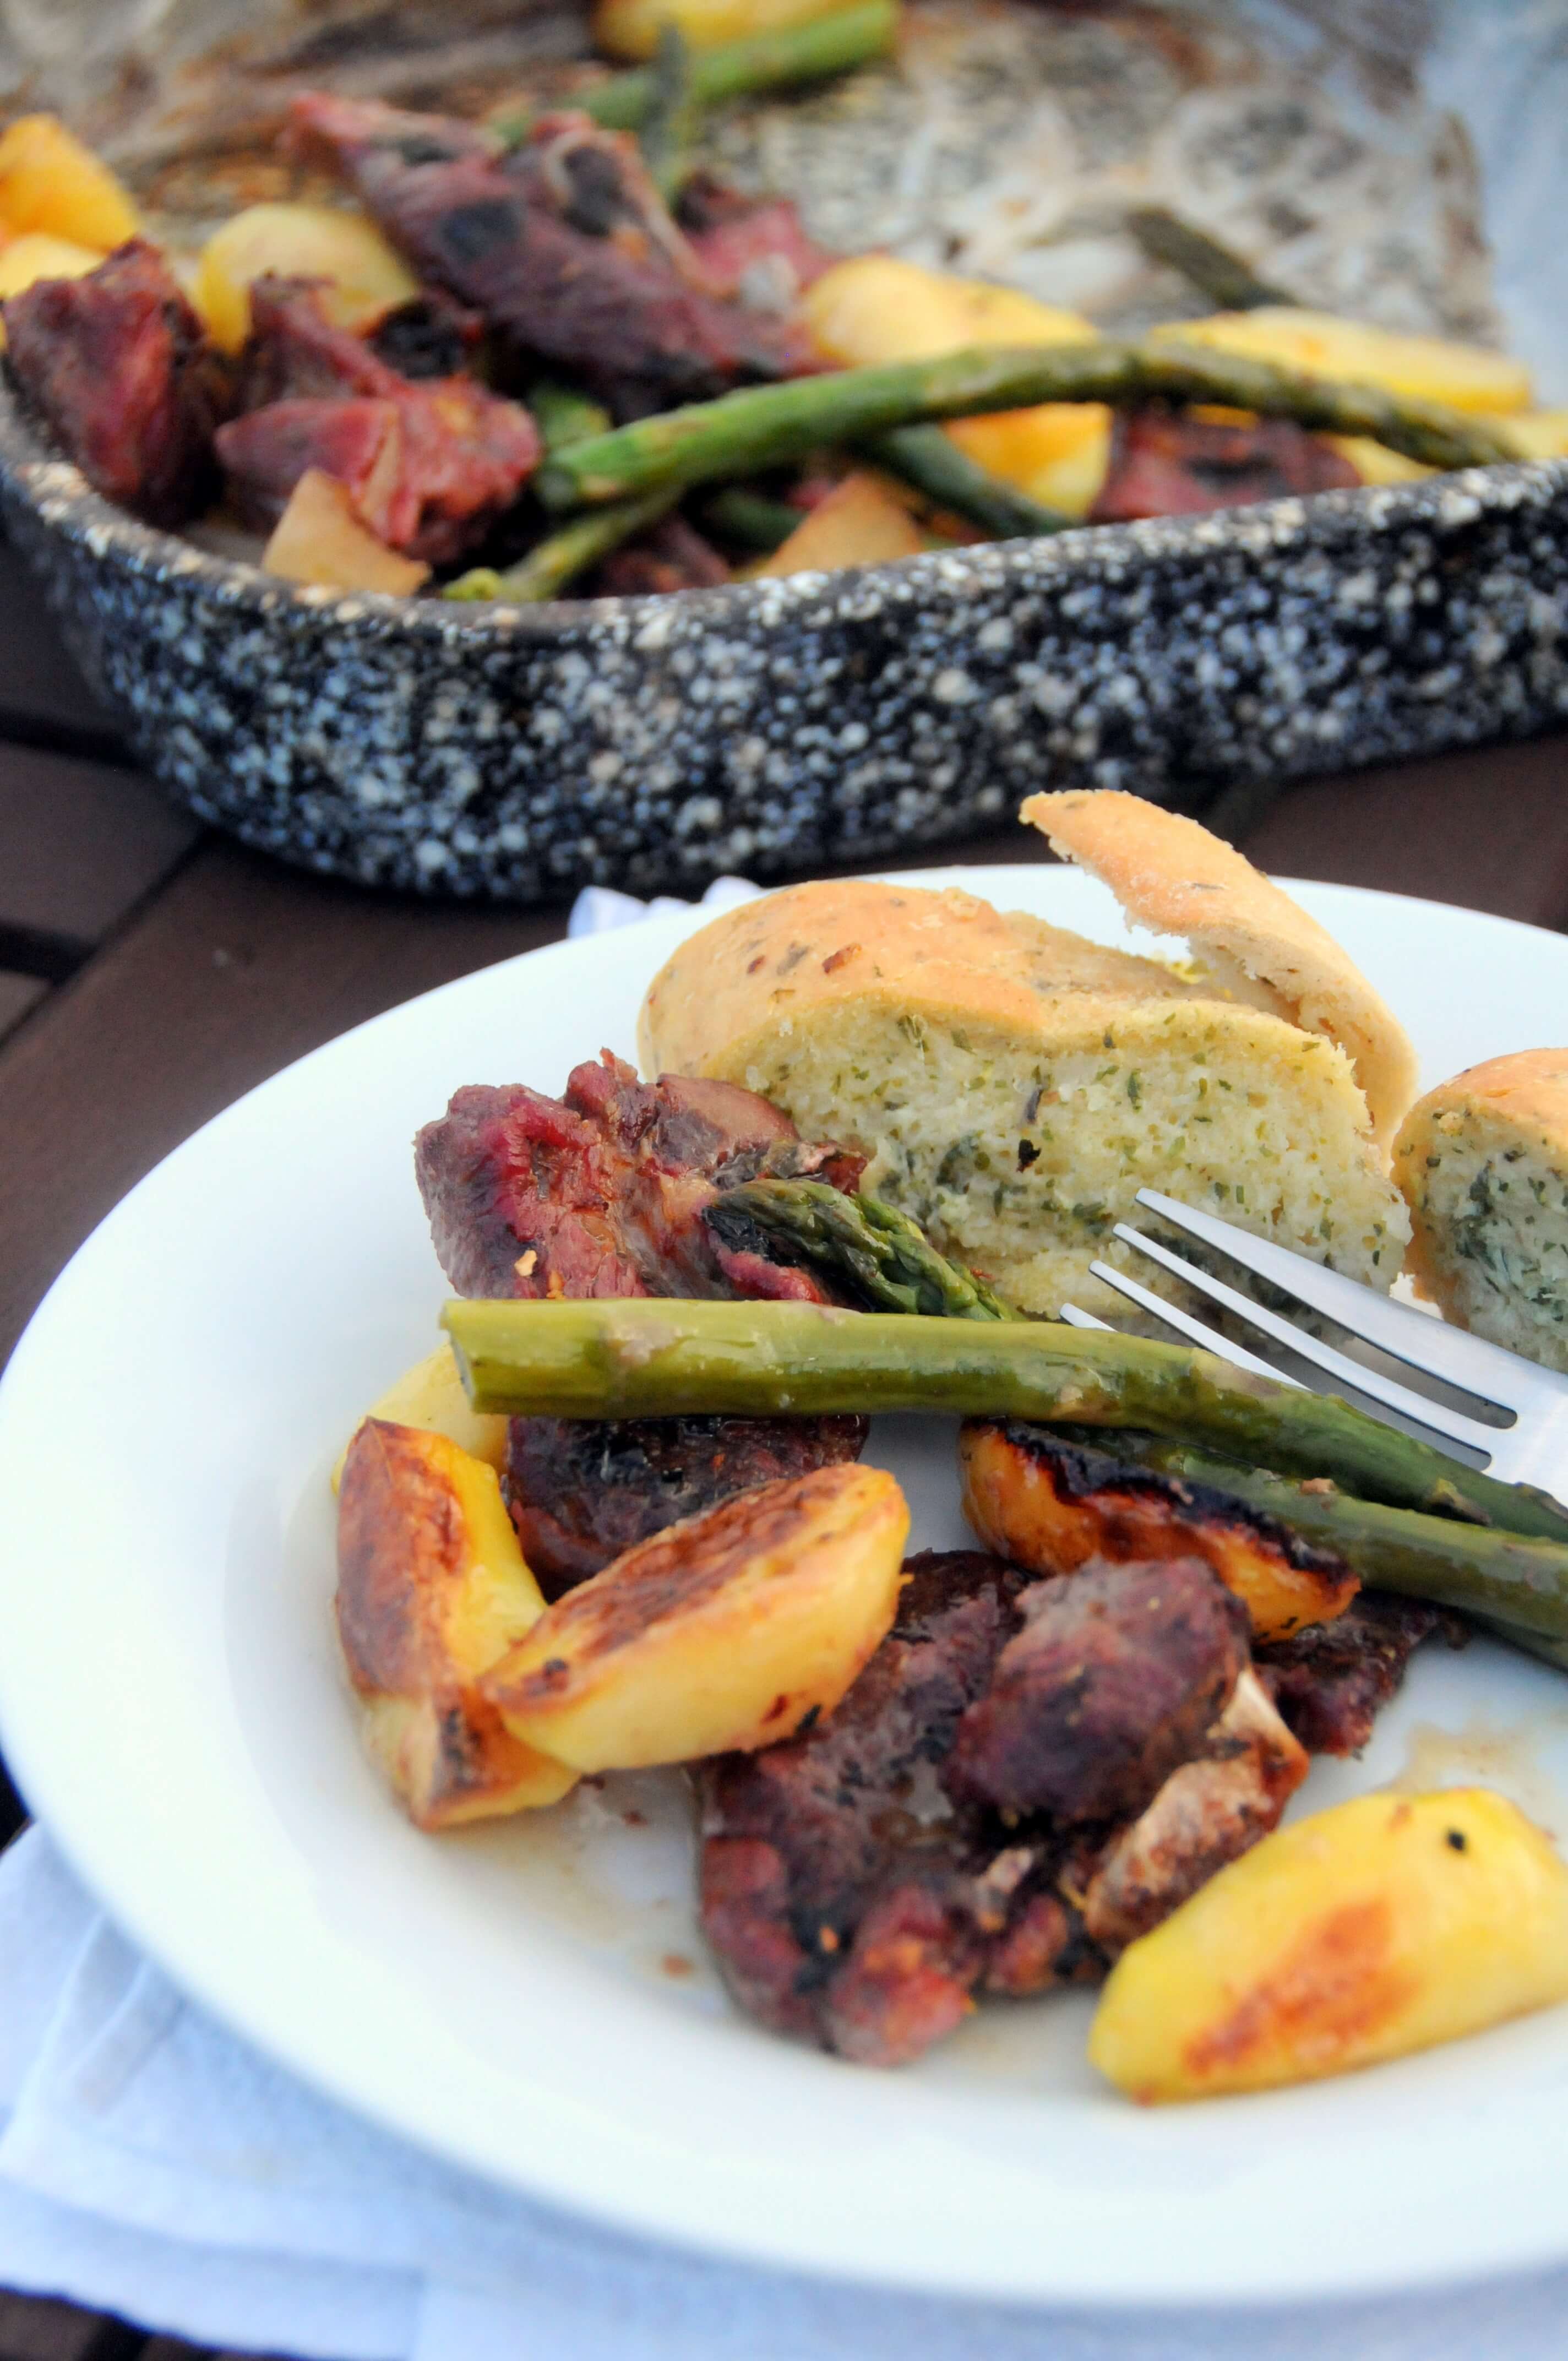 In Season: Welsh Lamb with New Potatoes and Asparagus (One Pan)